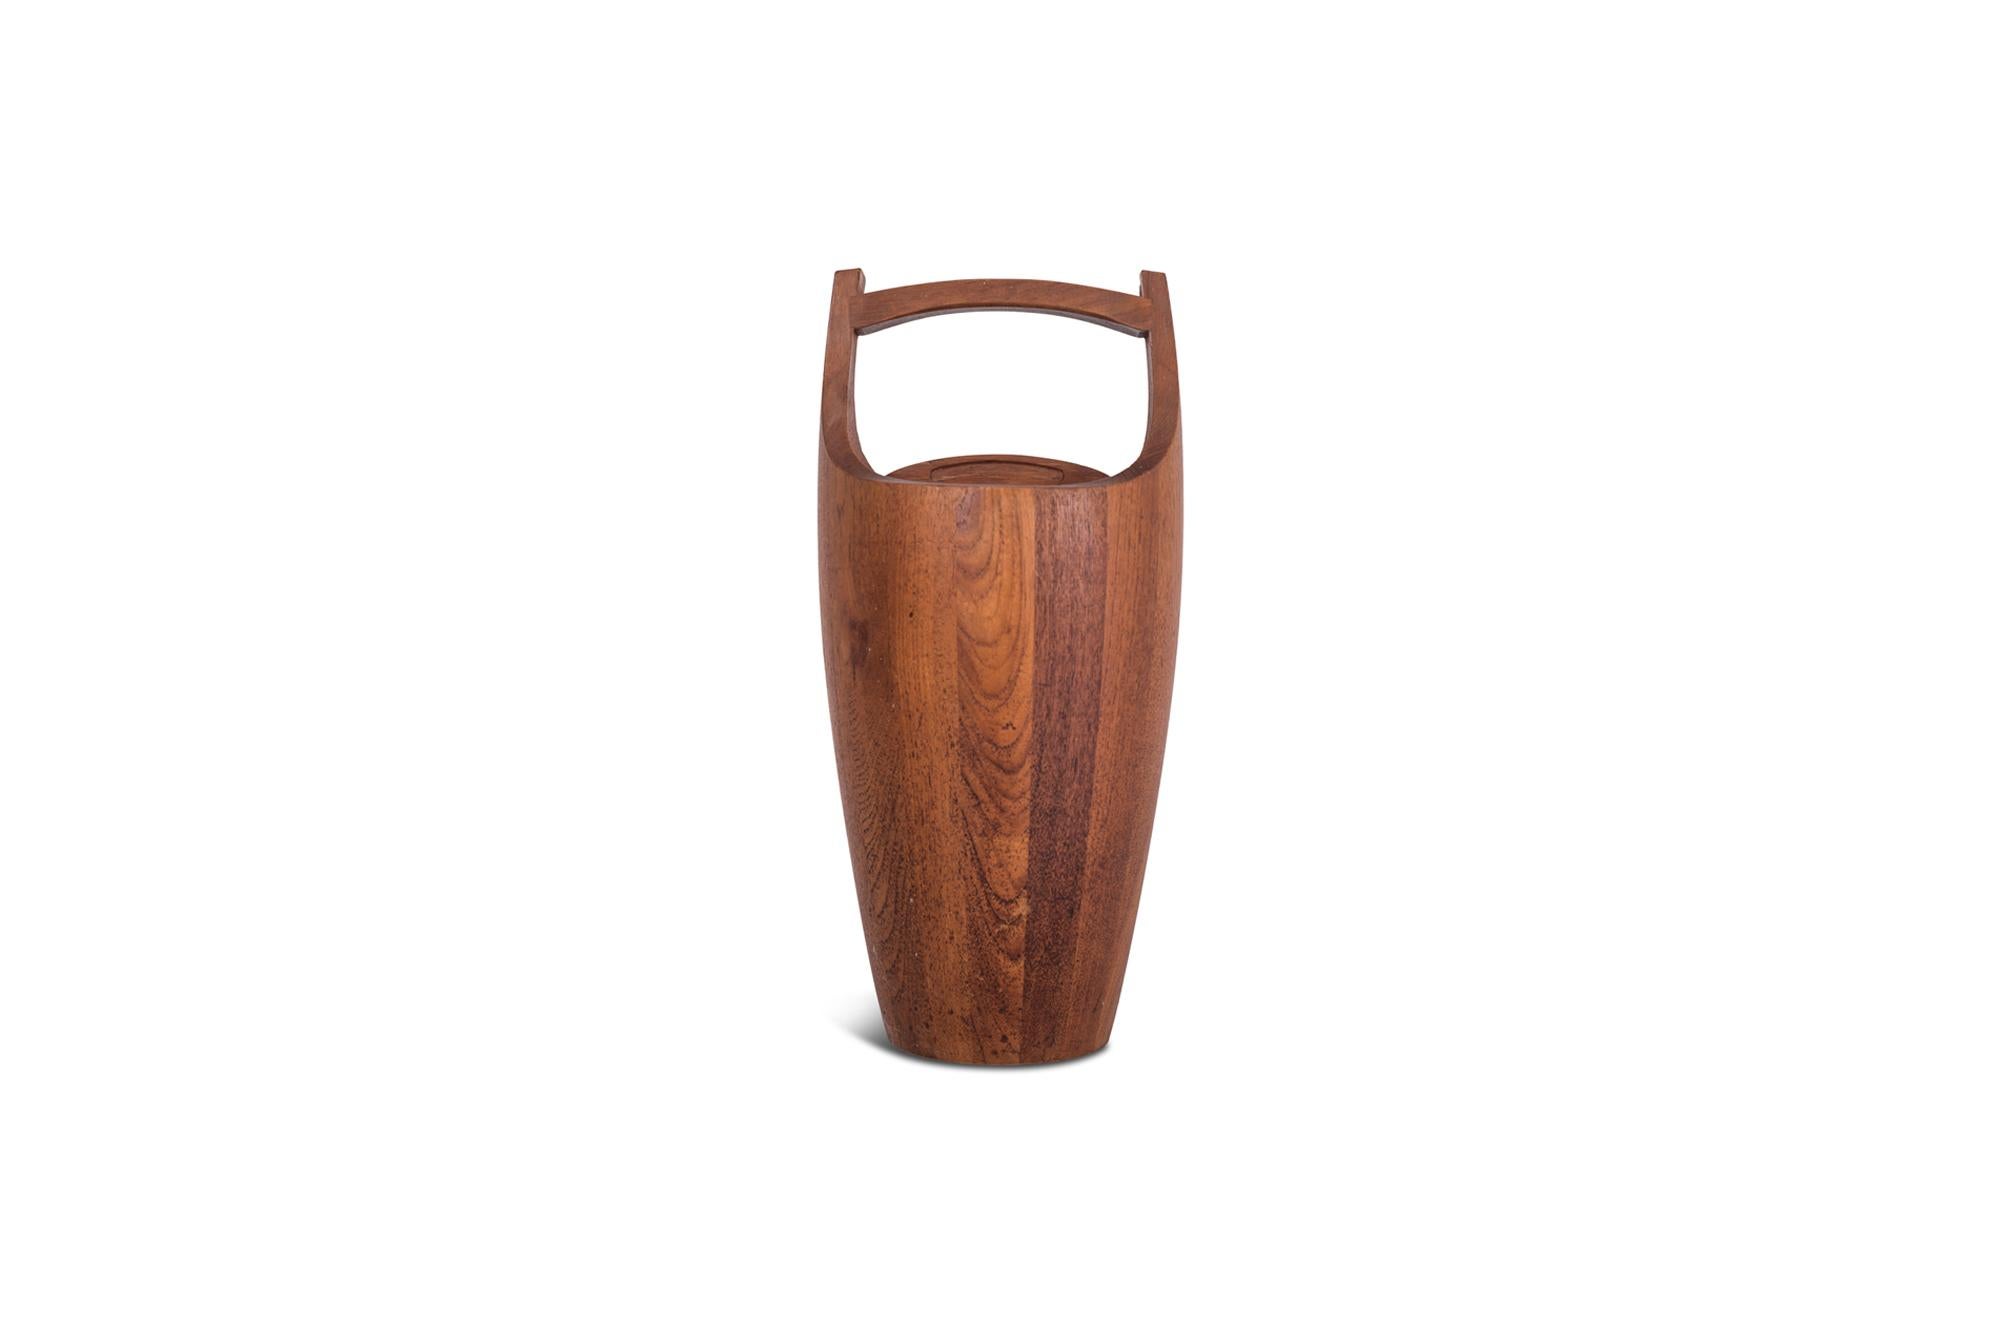 Danish ice bucket in solid teak. The wood shows a beautiful grain and provides this object with a nice, elegant and warm appearance. The red / bright orange acrylic liner contrasts nicely, the bucket comes in very useful to cool your favourite